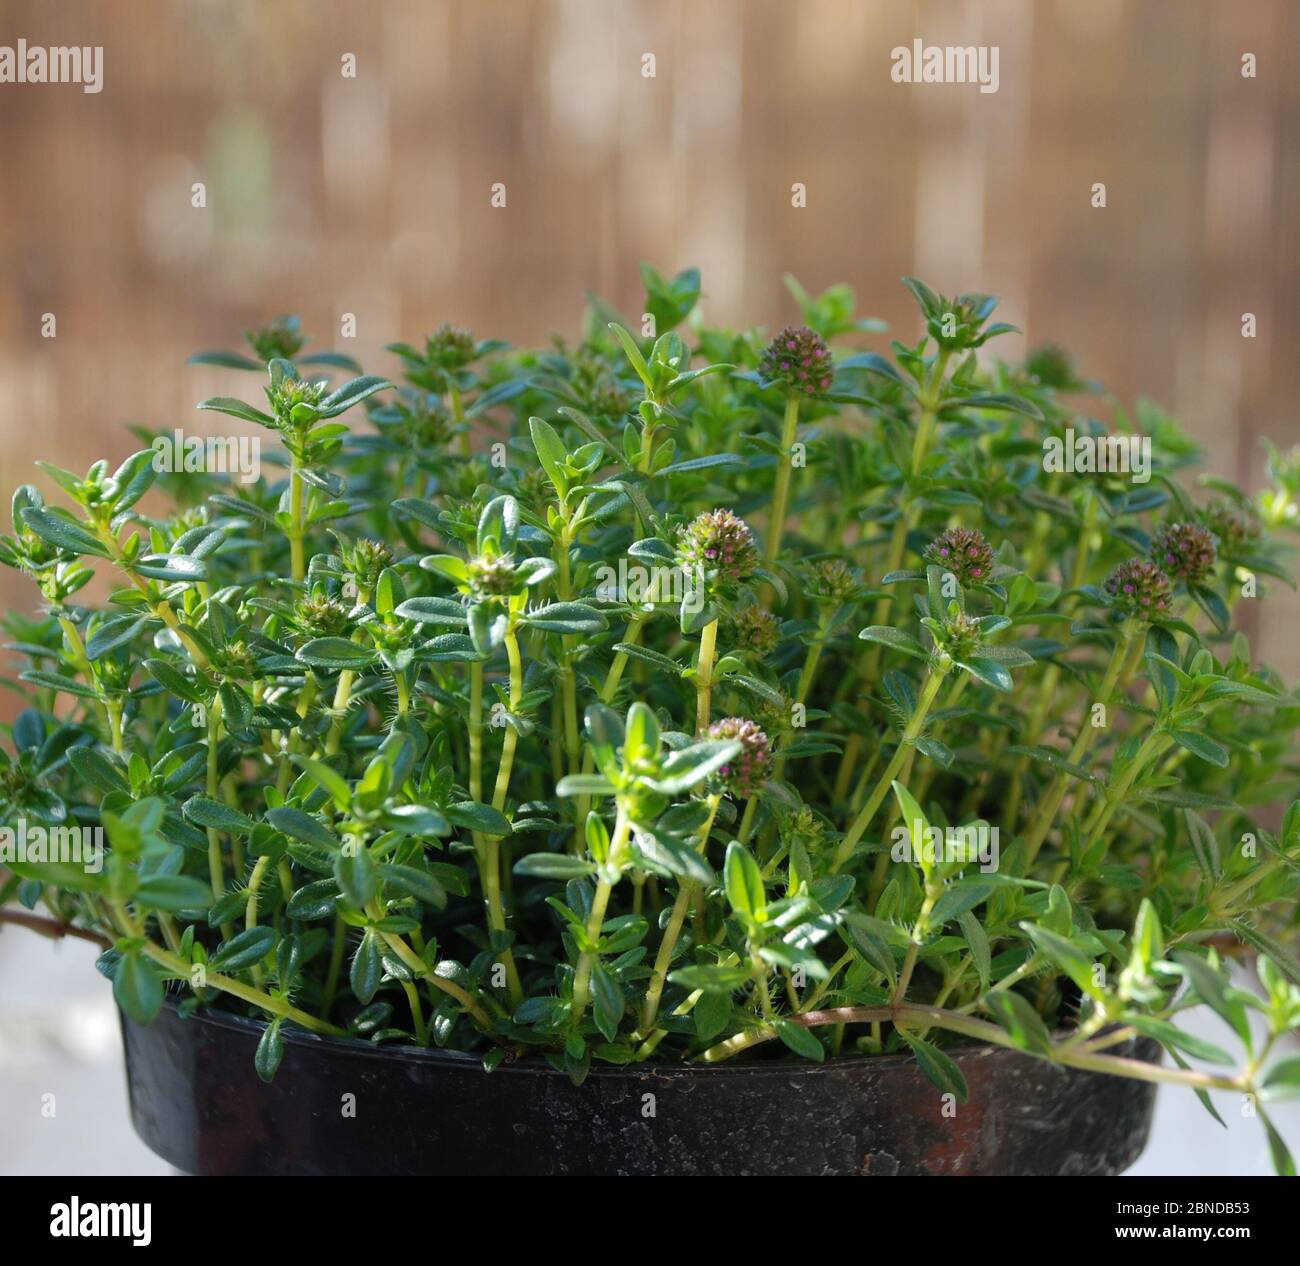 A small Santoreggia or Summer Savory plant in a plastic pot in dappled sunlight. This herb is good for flavouring dishes and has medicinal qualities Stock Photo